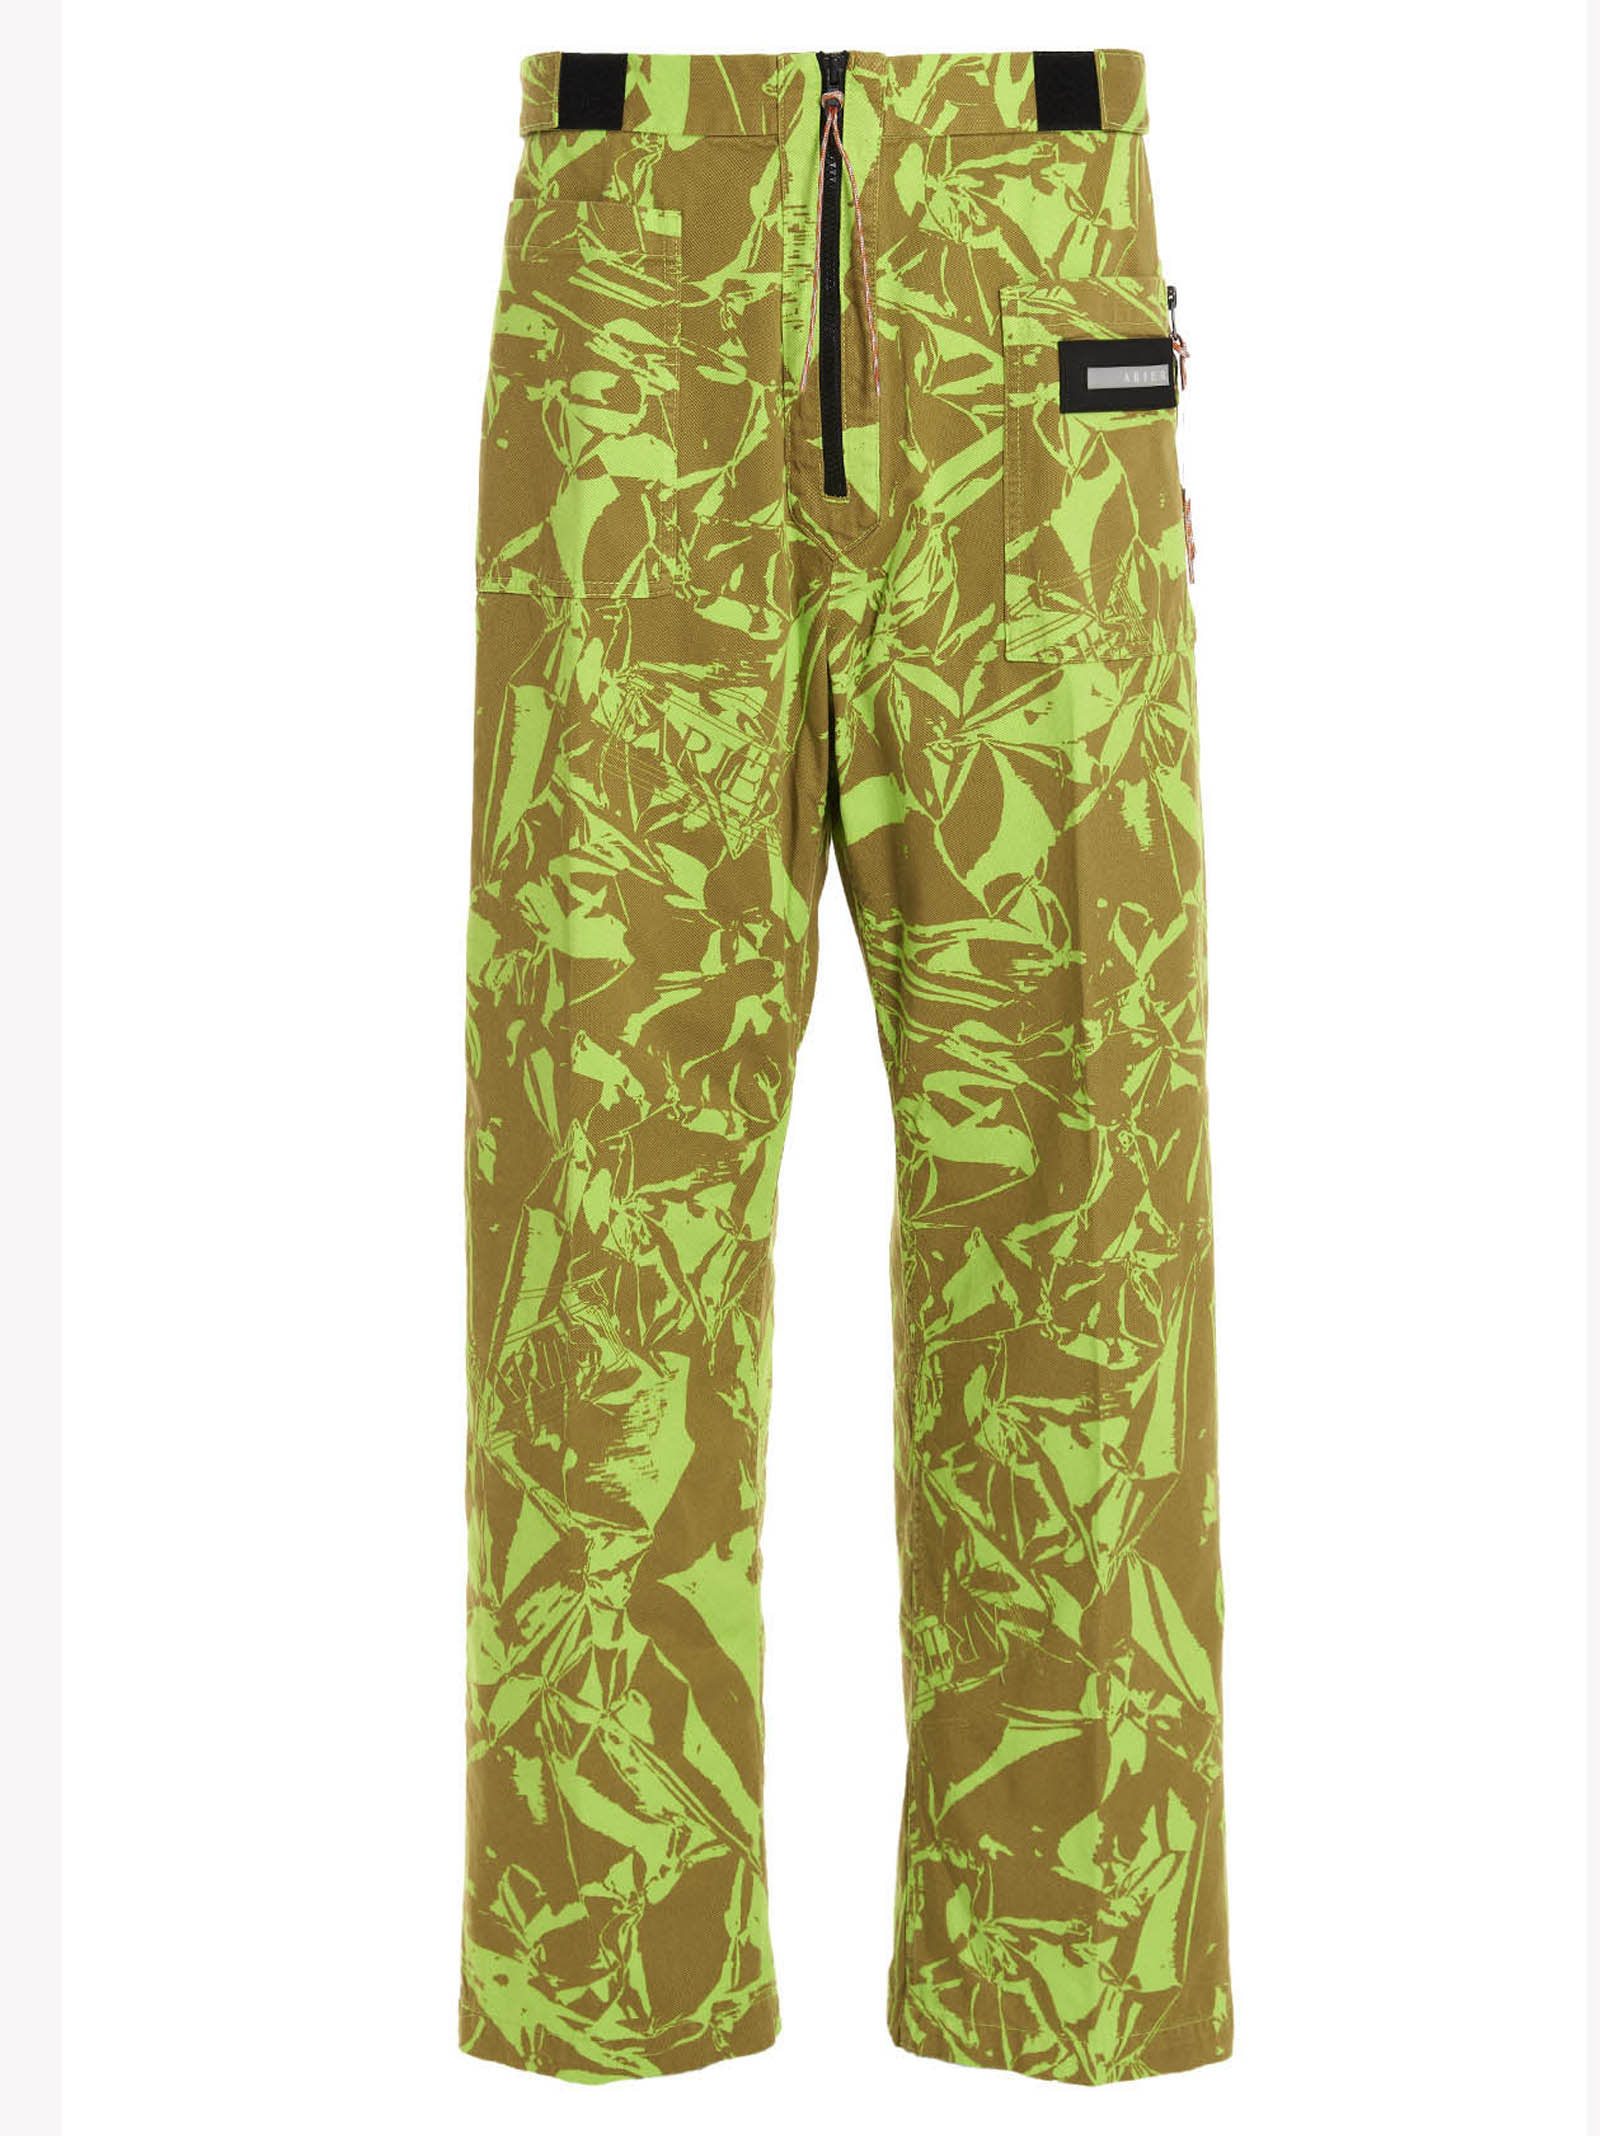 Aries Camouflage Cargo Pants